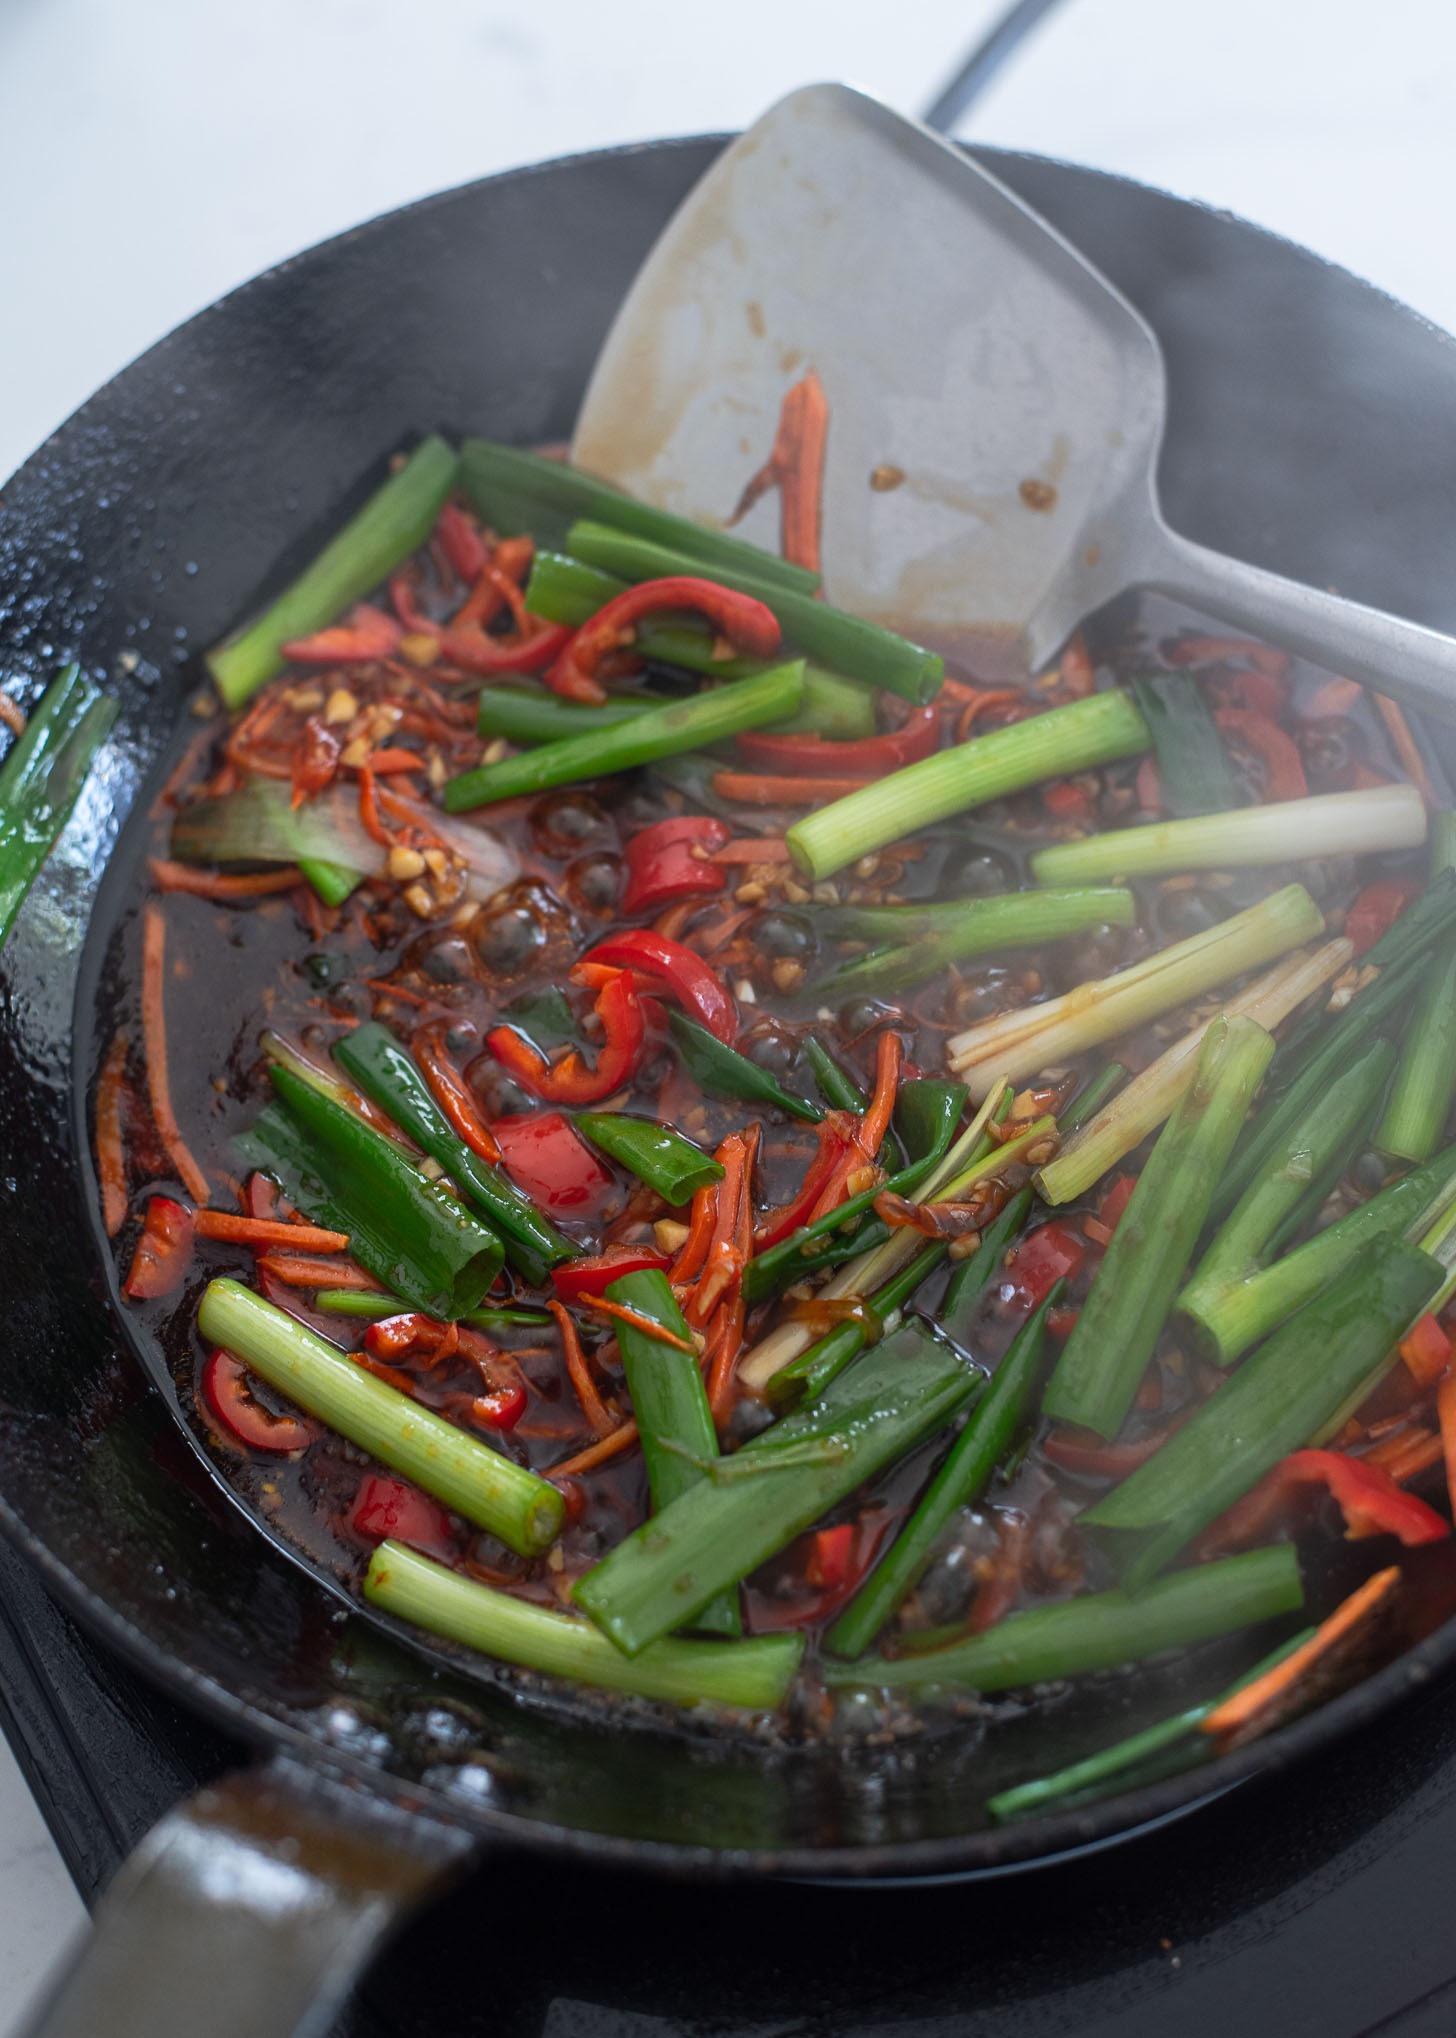 Green onion and crispy chili beef sauce are added to the skillet.